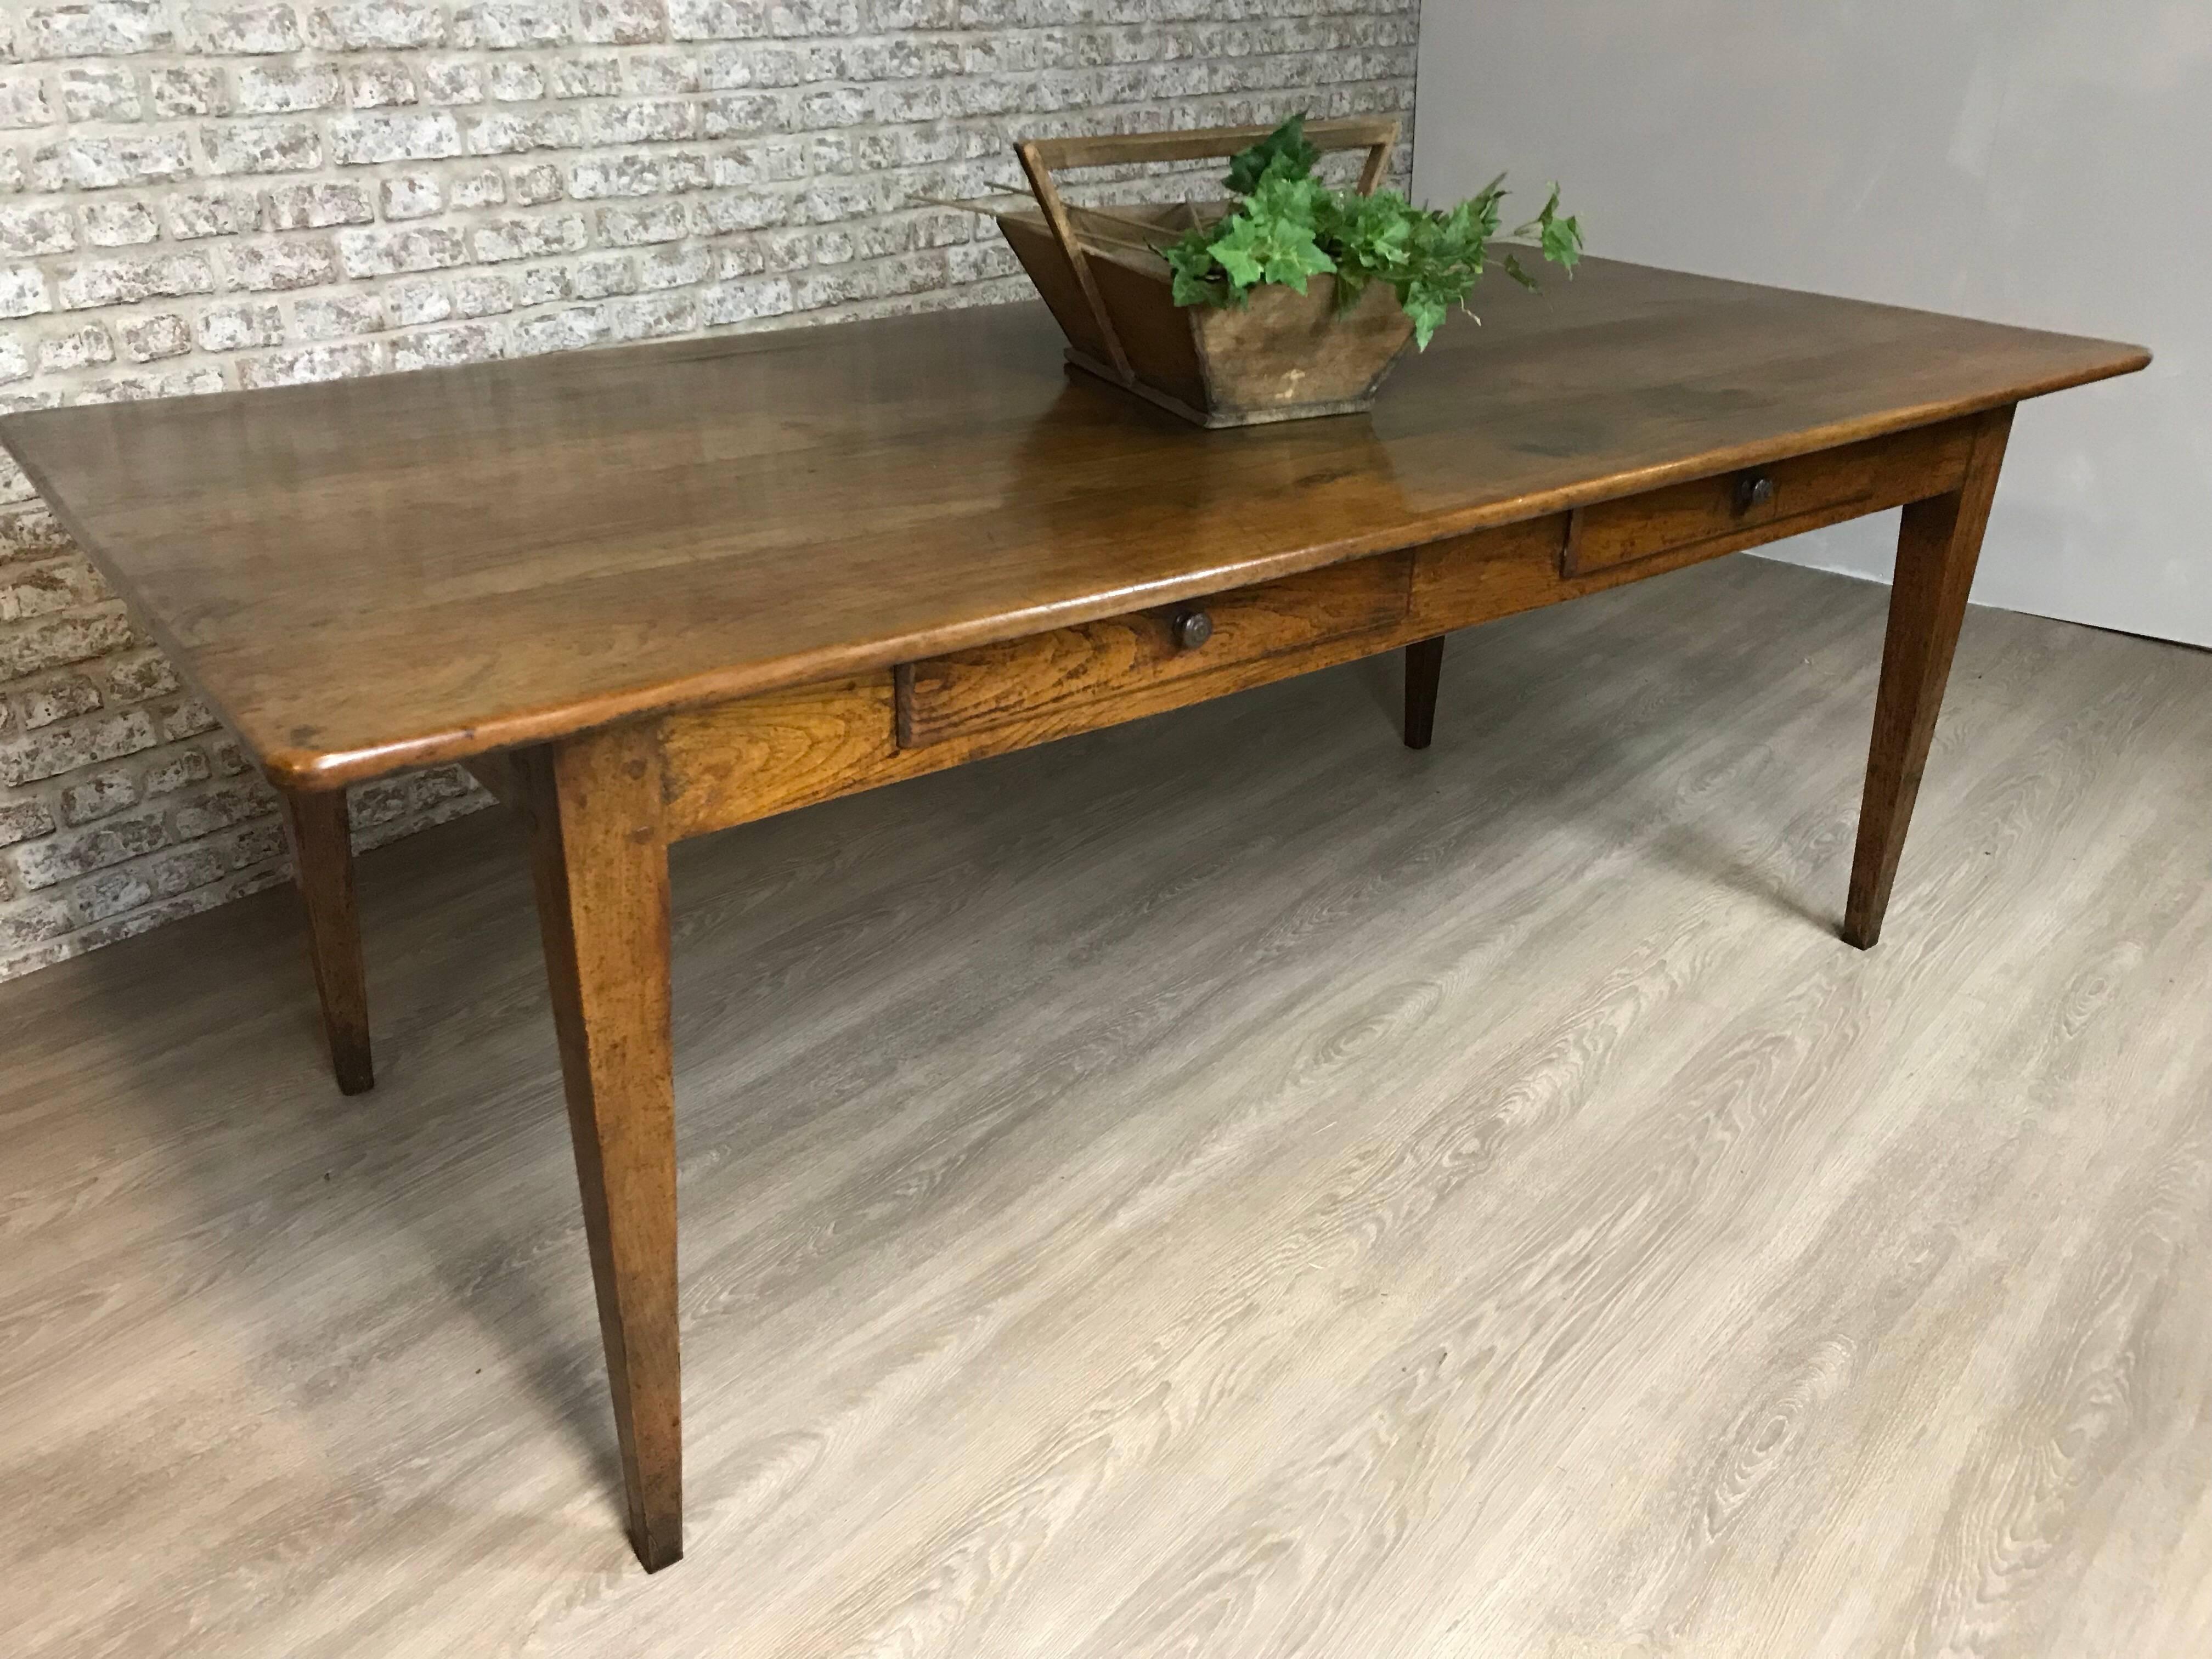 This exceptionally wide French cherry antique table with two drawers has a fabulous five-plank top. The apron sits on four tapered legs with two side drawers that finish the look of a very elegant table. The table is lovely medium brown color with